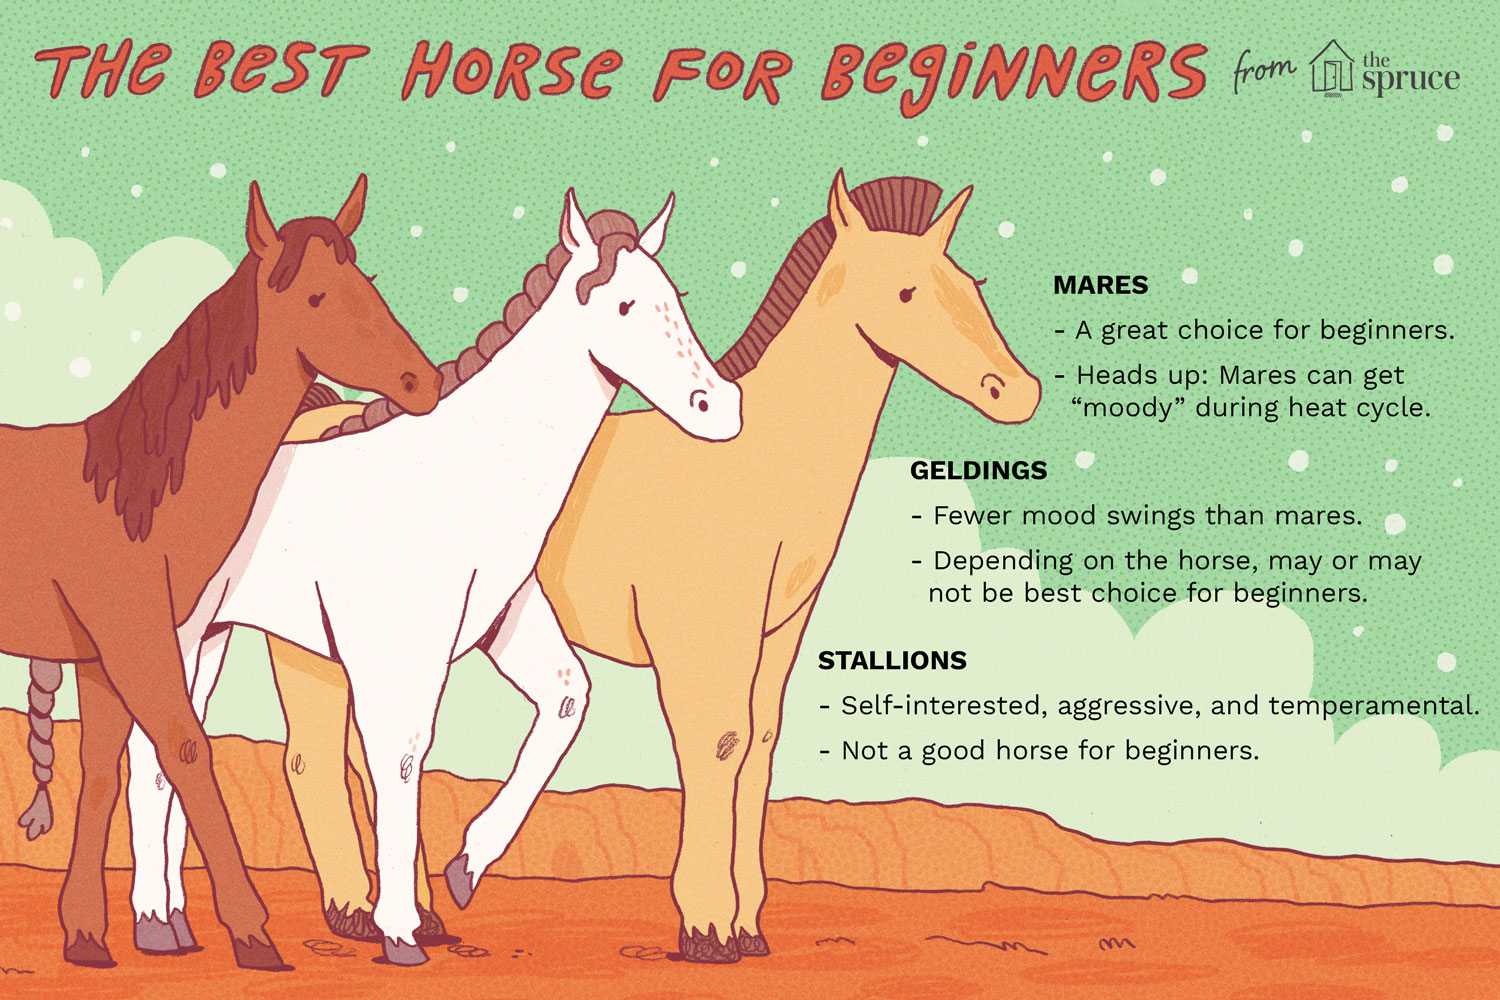 An illustration of a mare, gelding, and stallion and facts about each